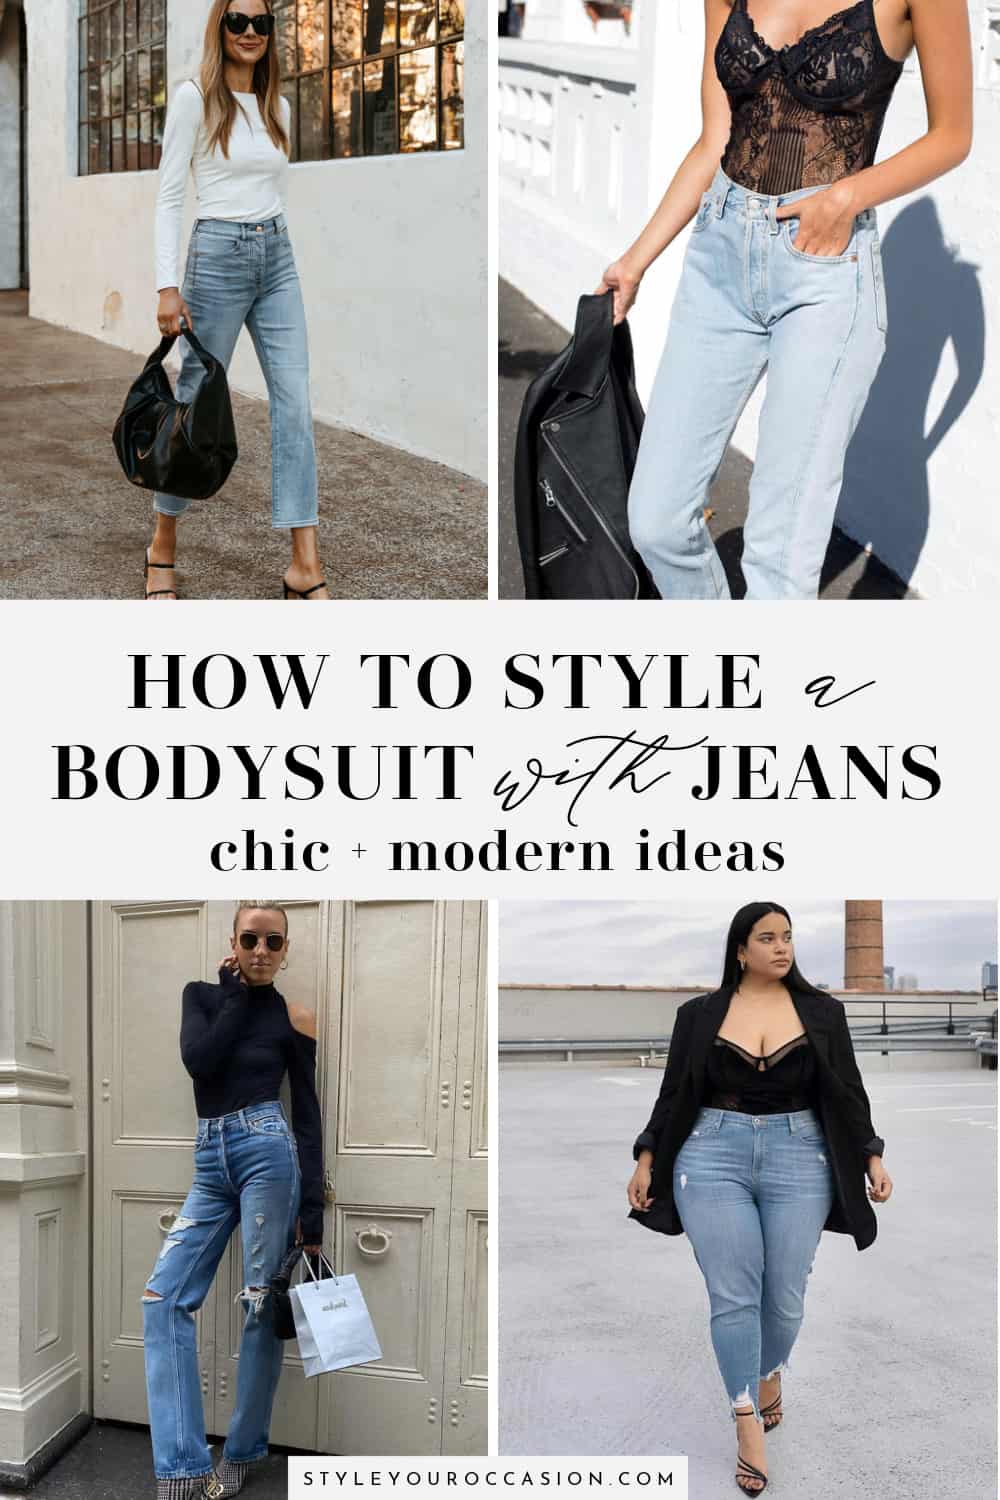 How To Wear A Bodysuit With Jeans: 14+ Chic Looks To Copy